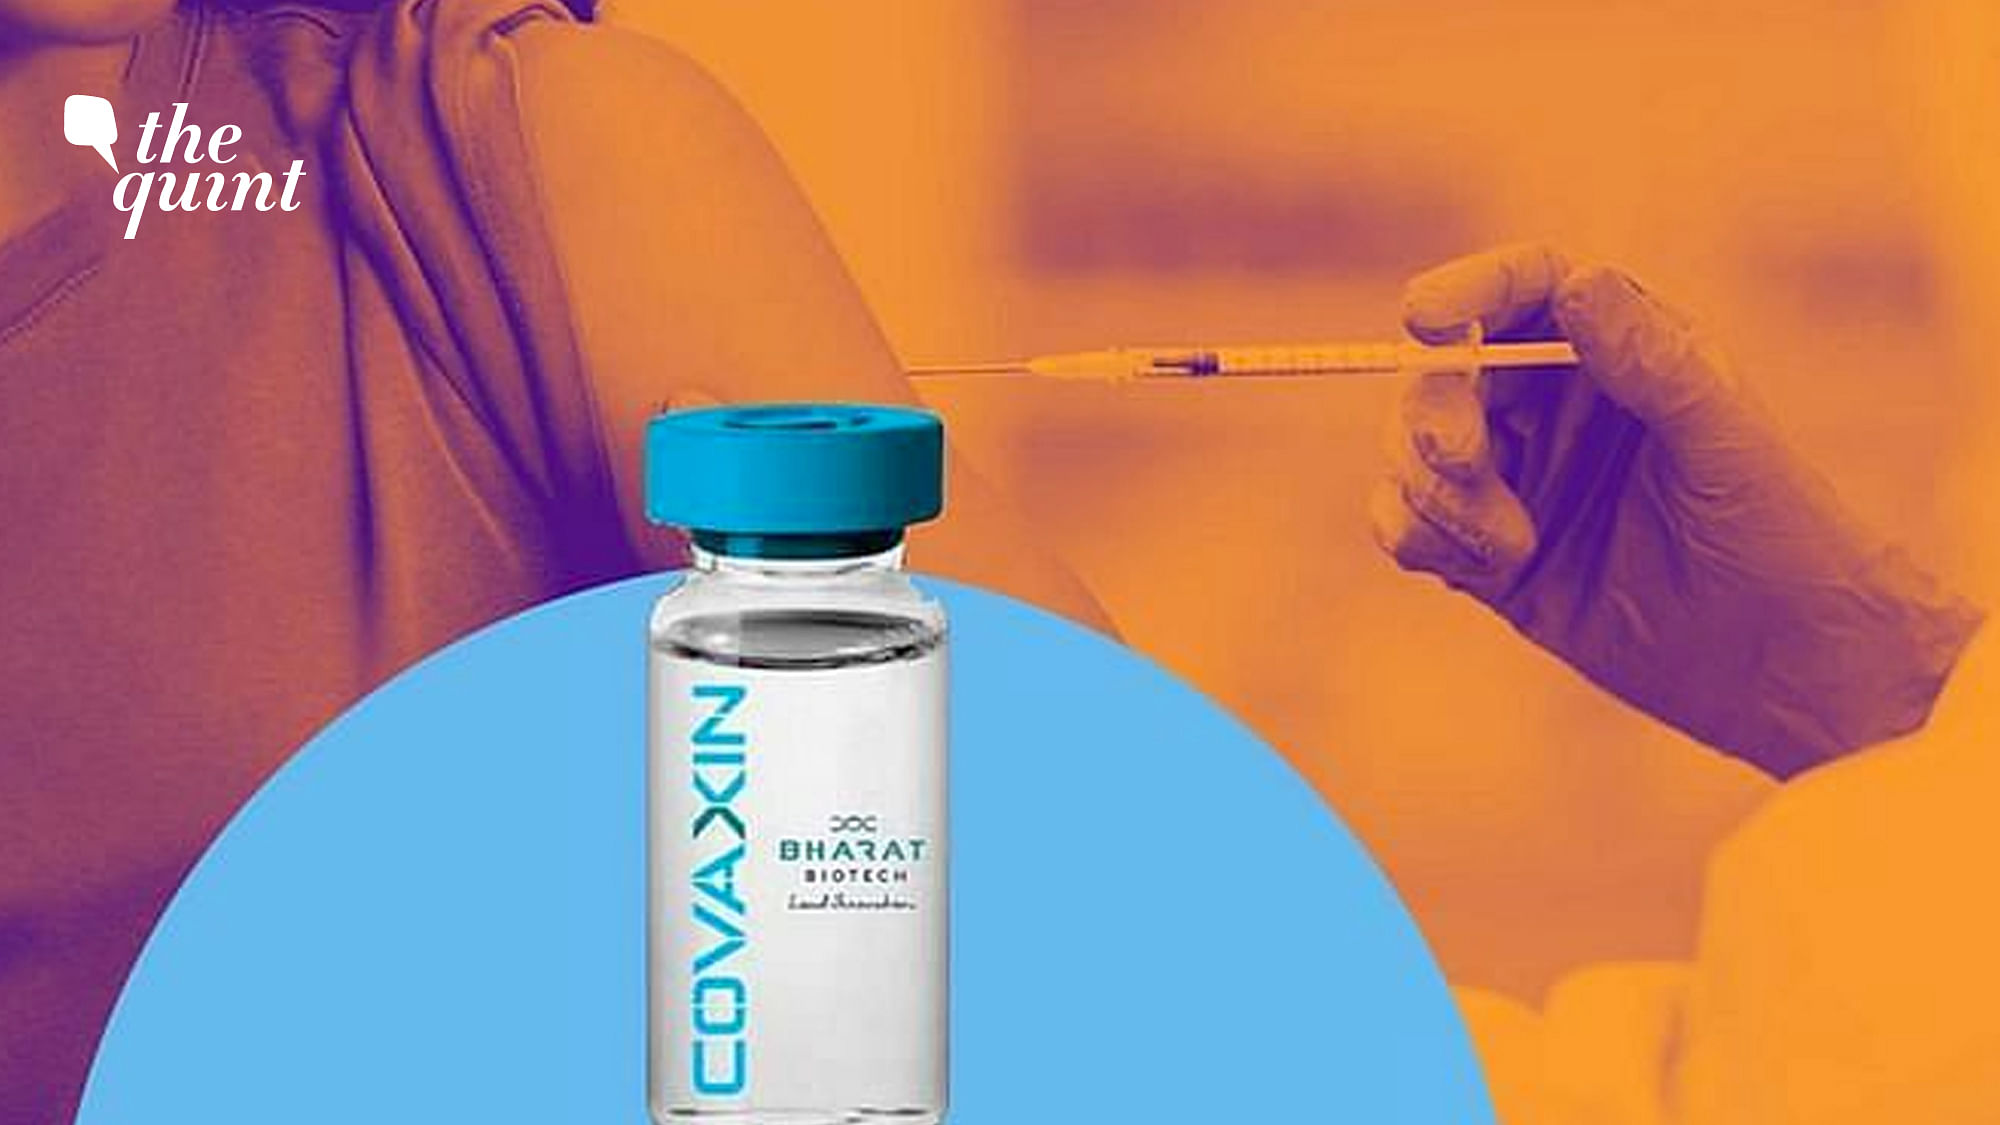 Covaxin was the first indigenously produced vaccine to be rolled out in India for public use.